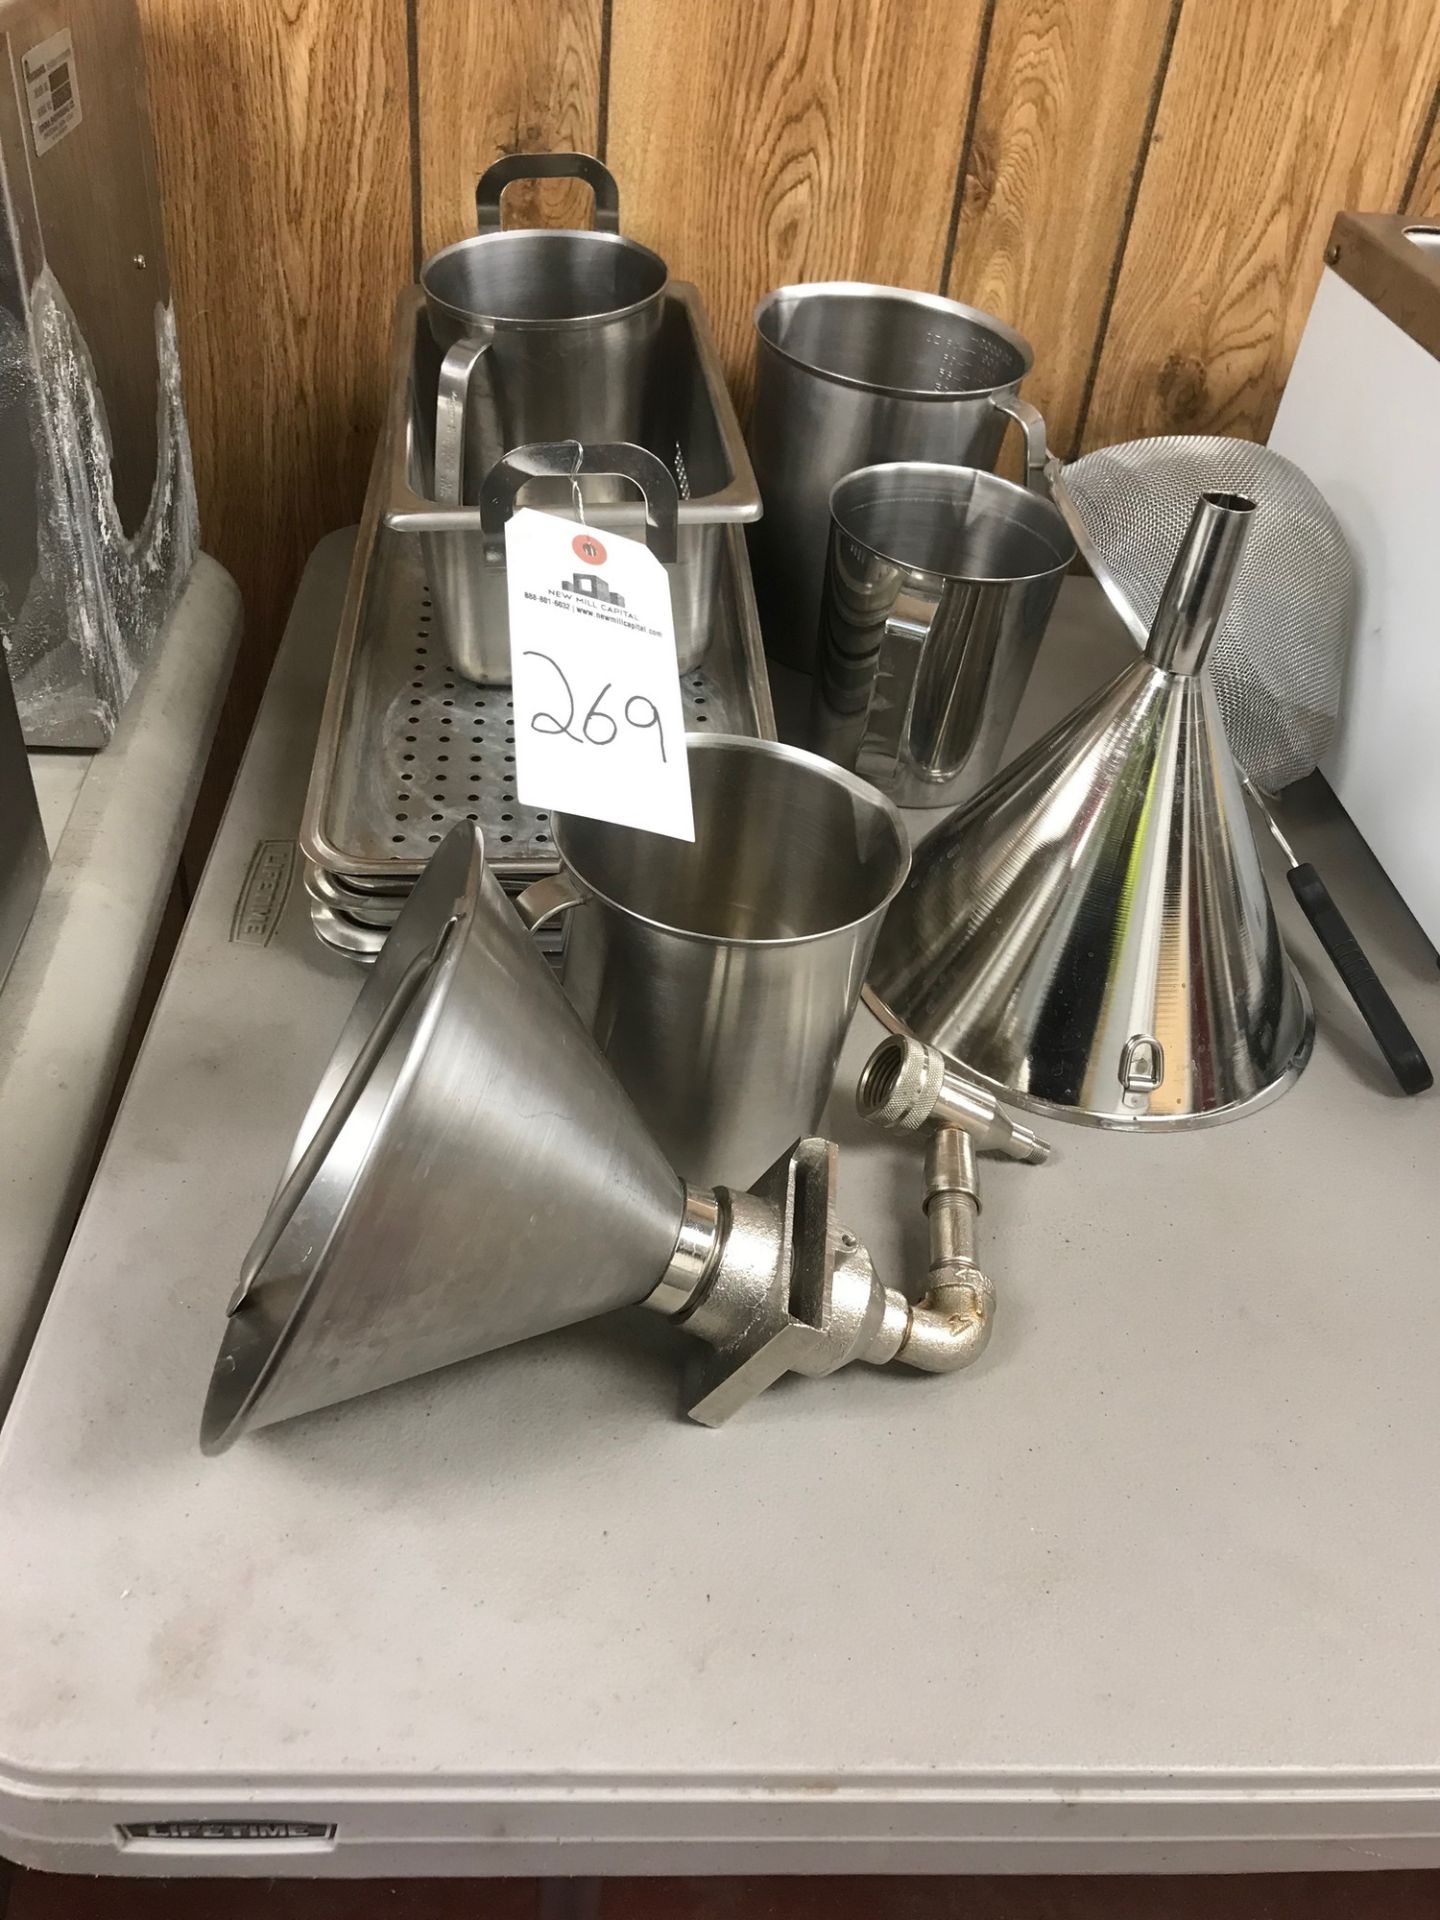 Lot of Funnels and Measuring Cups, Stainless Steel